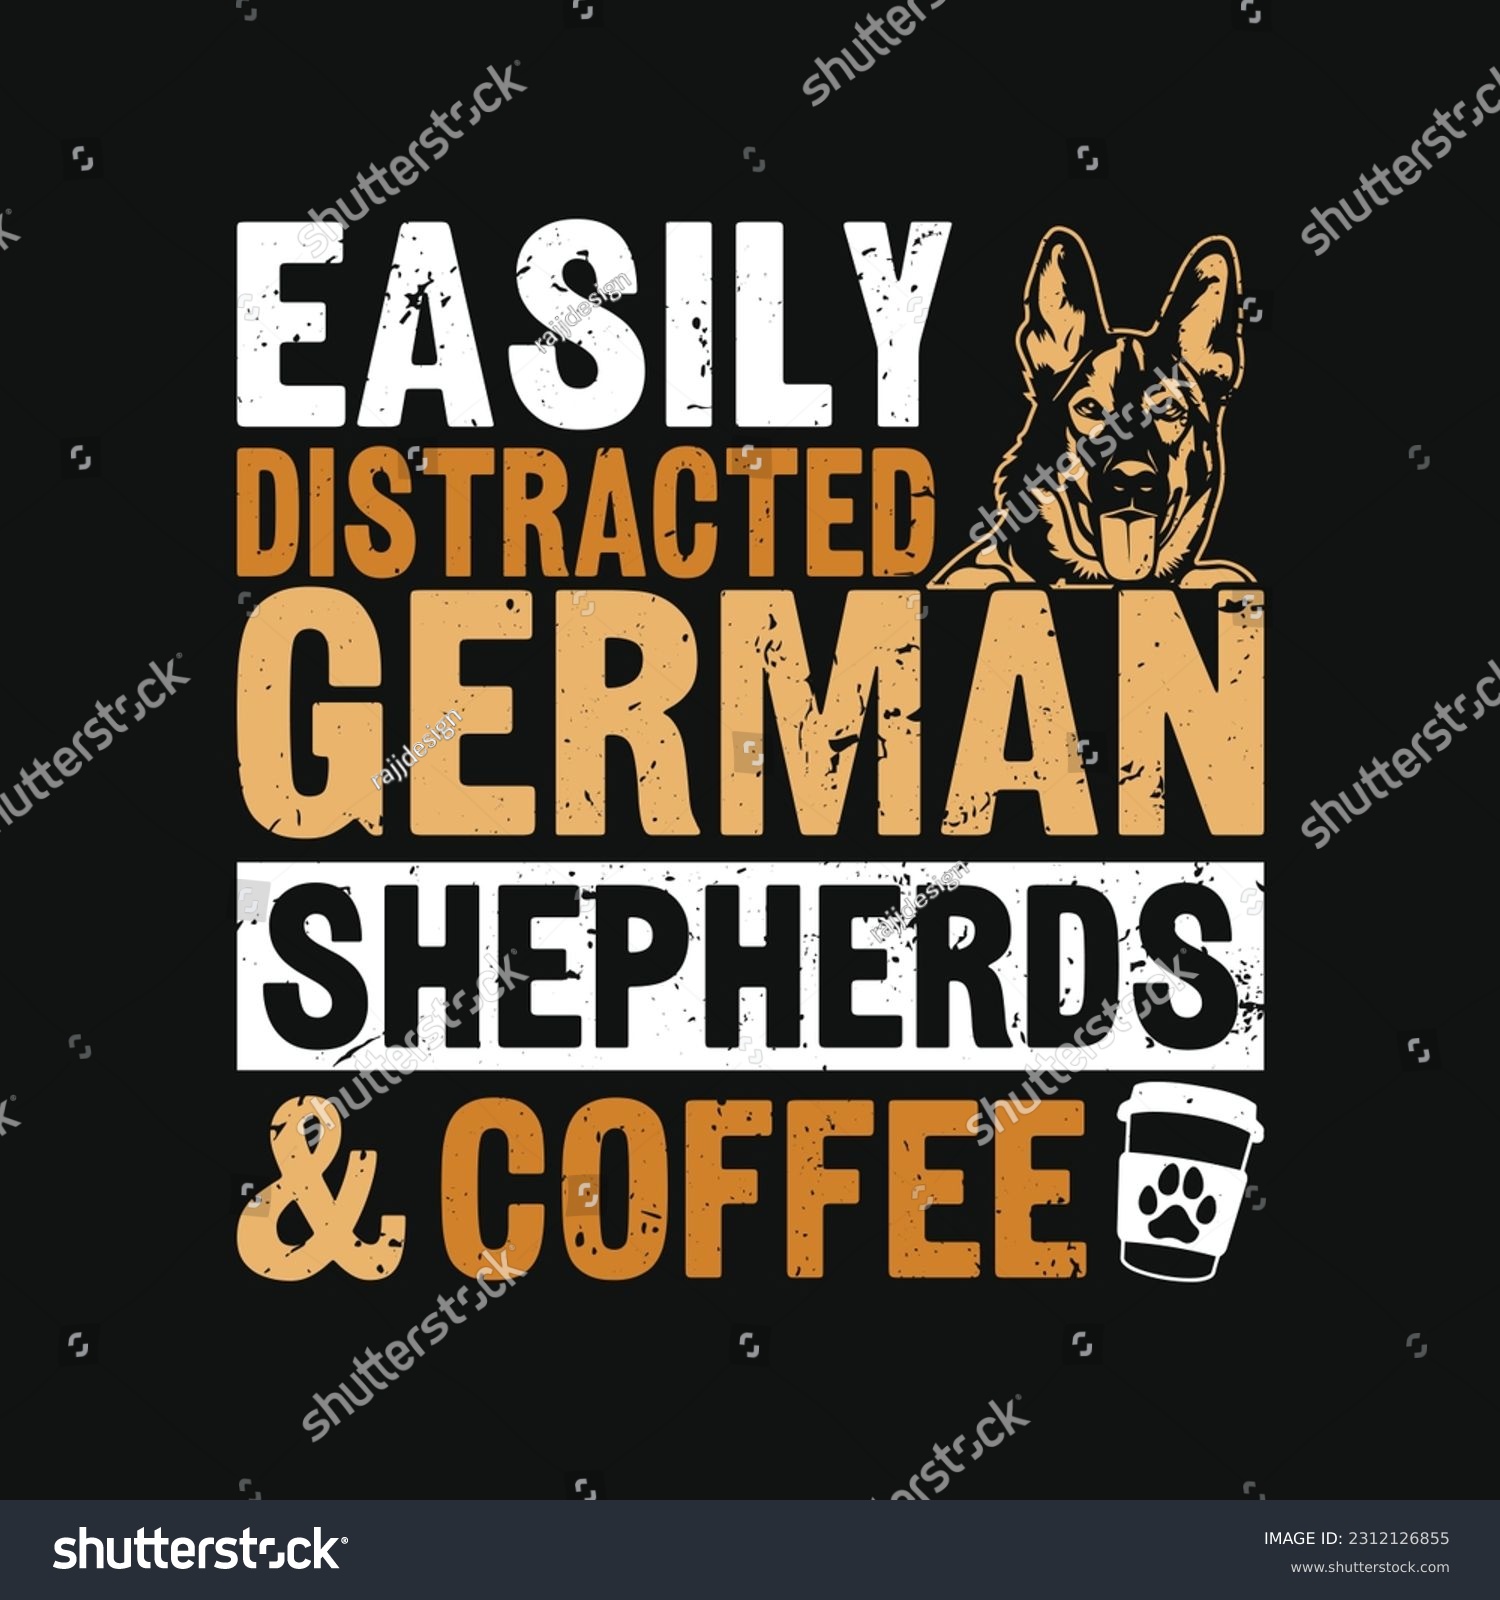 SVG of Easily Distracted German Shepherds  Coffee T-Shirt Design, Posters, Greeting Cards, Textiles, and Sticker Vector Illustration svg